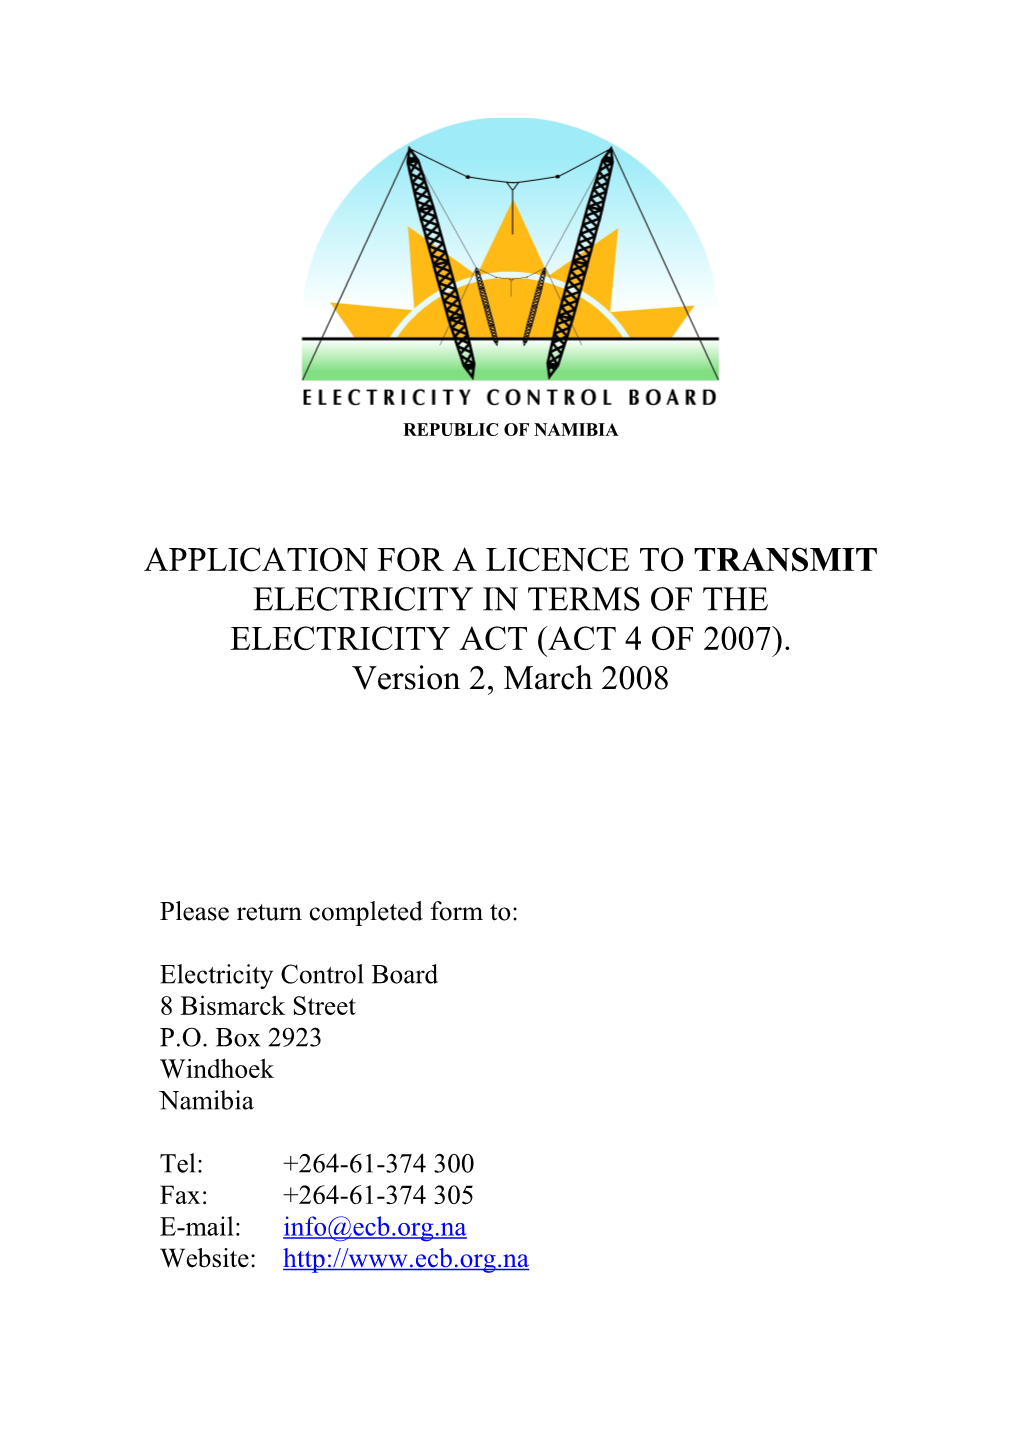 Application for a License to Distribute Electricity